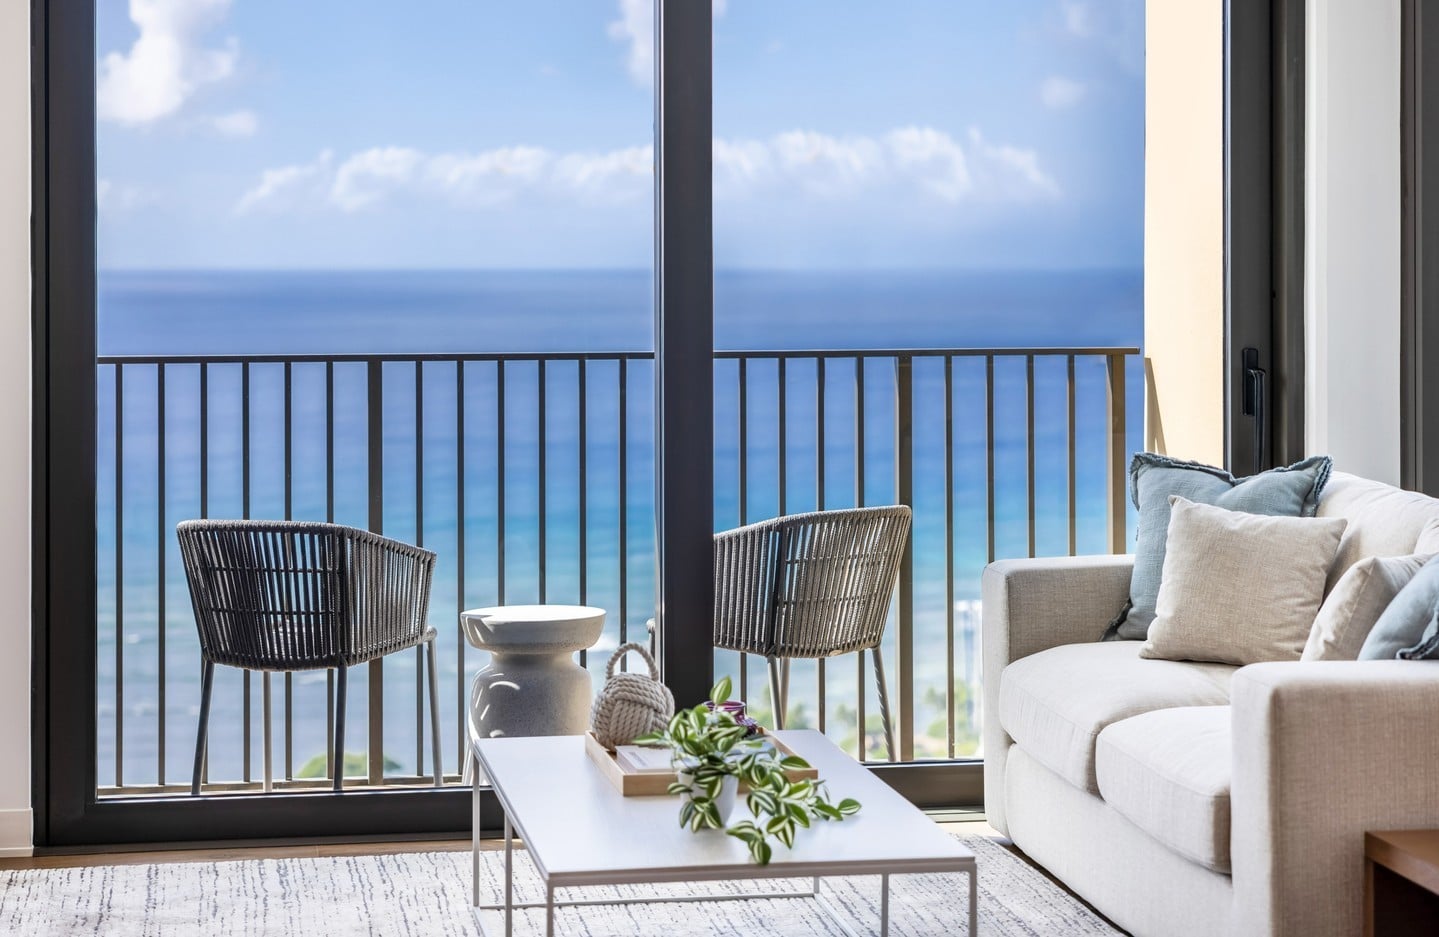 At ‘A‘ali‘i, the comfort of contemporary island living is yours with well-designed residences and amenities for how you live today. Visit the link in our bio to schedule a tour of these furnished move-in ready homes.